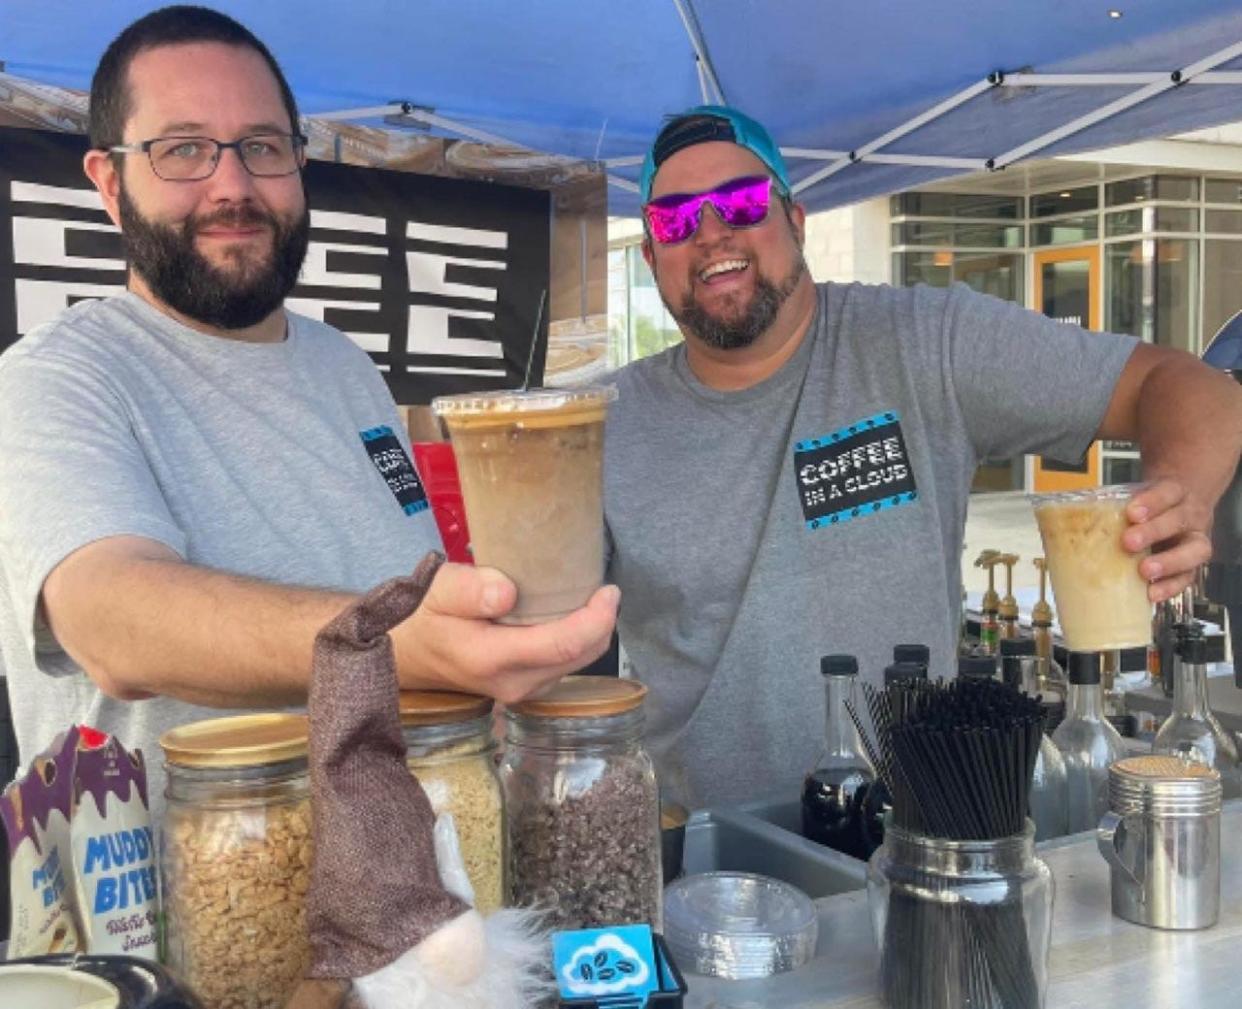 Dominic Guerino, left, and Scott Skibosh opened Coffee in a Cloud in 2021, selling whipped lattes with a variety of creative toppings and additions.